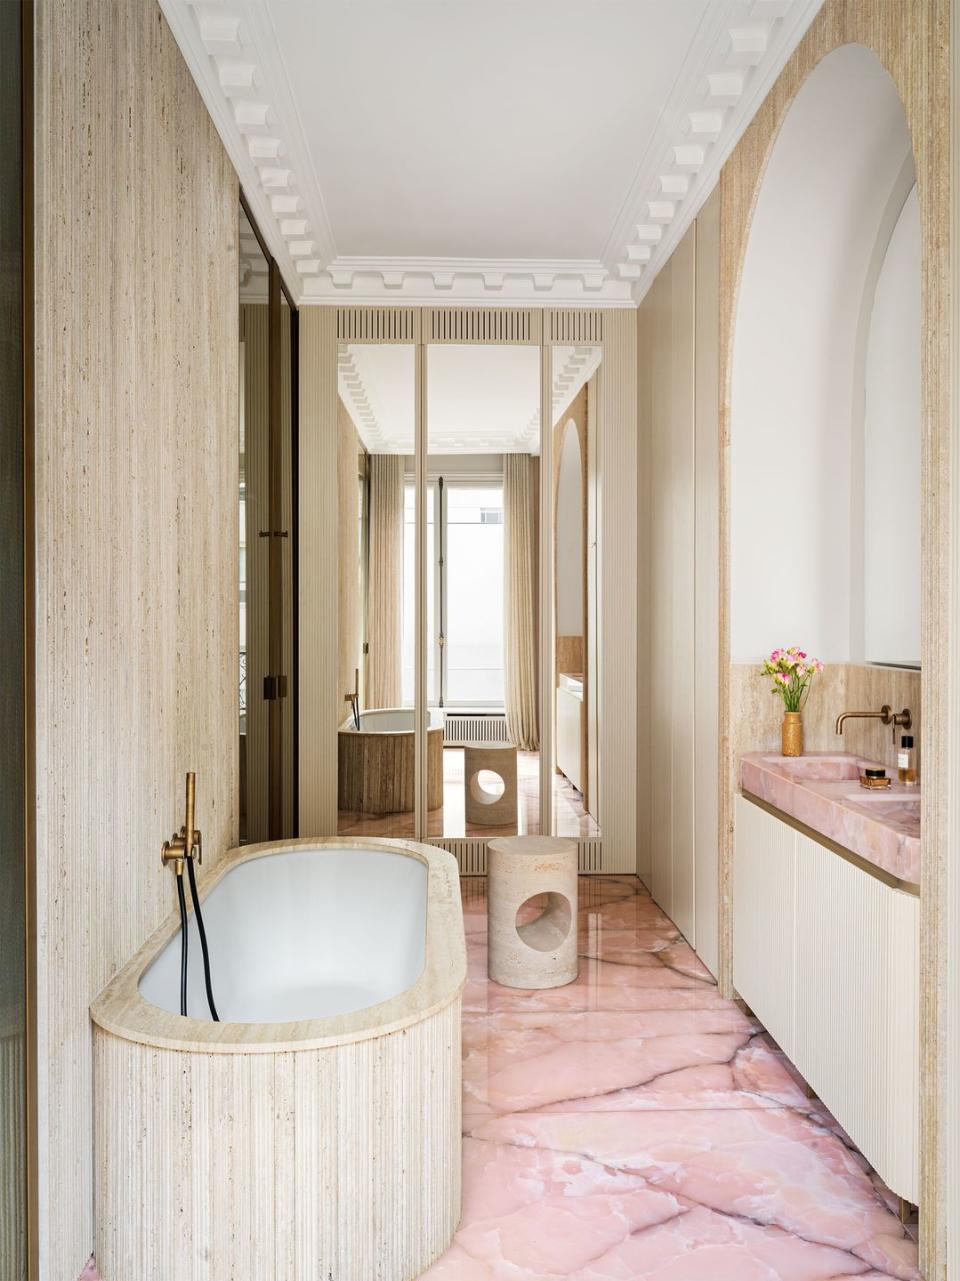 bathroom with pink marble floor and sink top, bathtub with grooved slats on exterior, cylindrical side table or stool, mirrored wall, sinks inset into arched wall, grooved lower cabinets